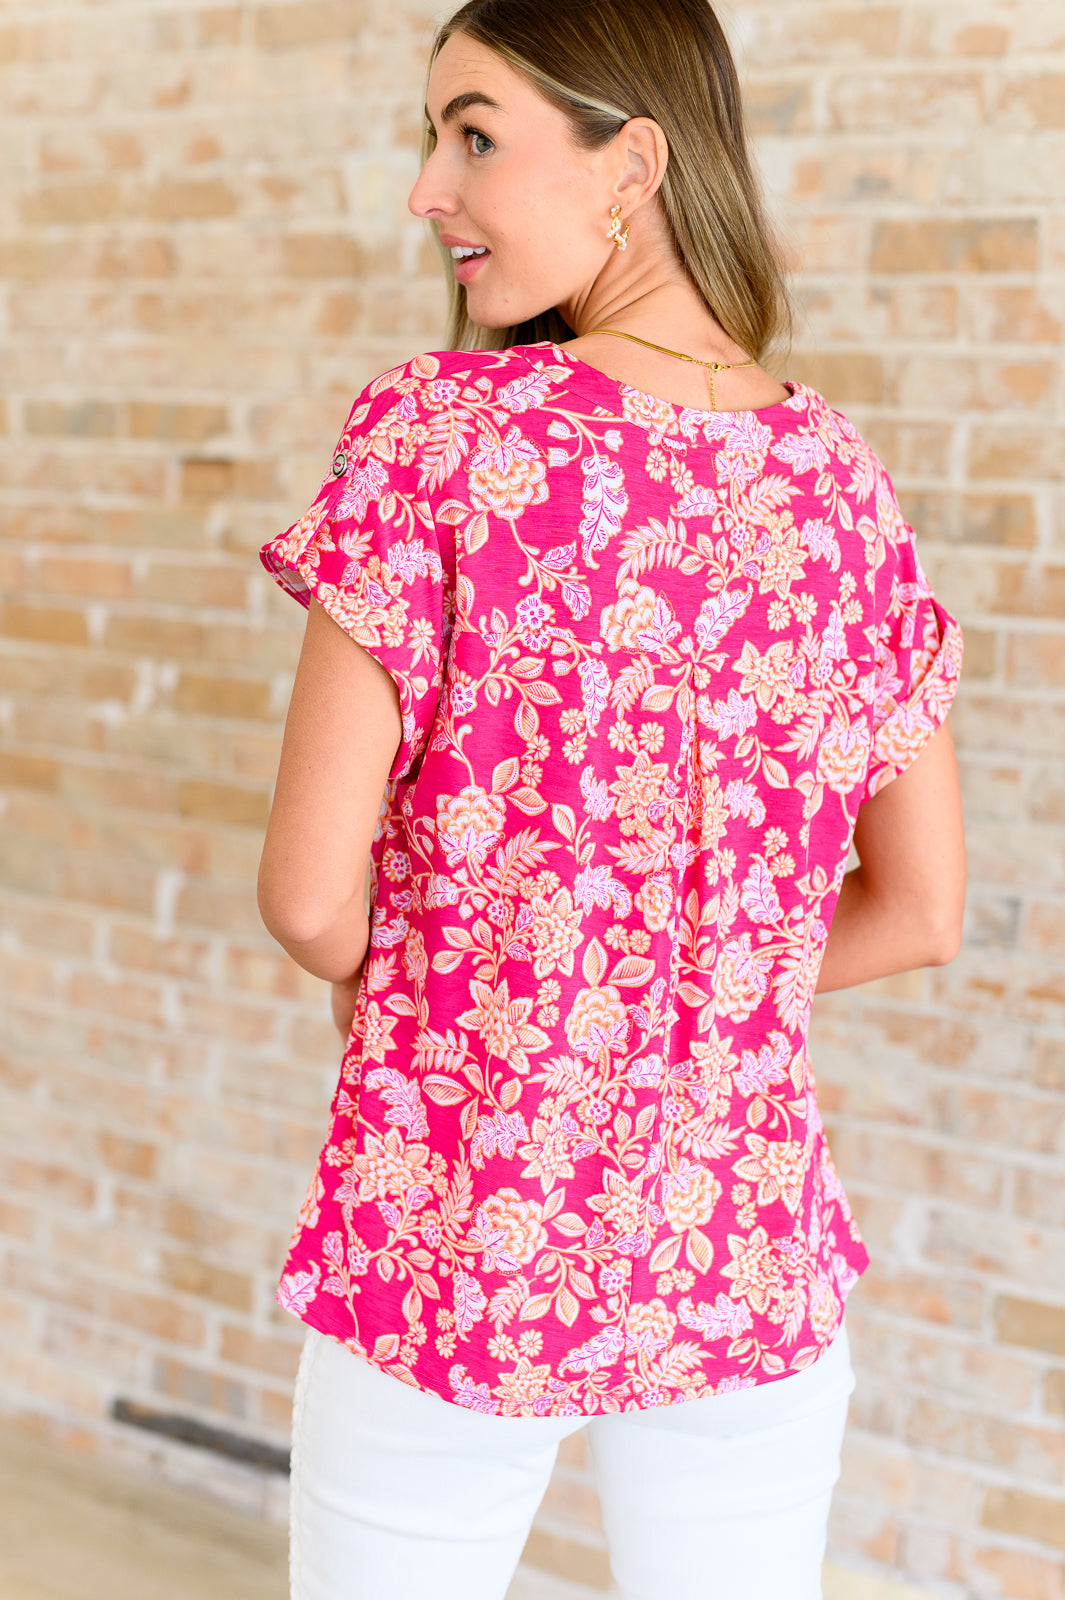 Dear Scarlett Lizzy Cap Sleeve Top in Pink and Peach Floral Ave Shops